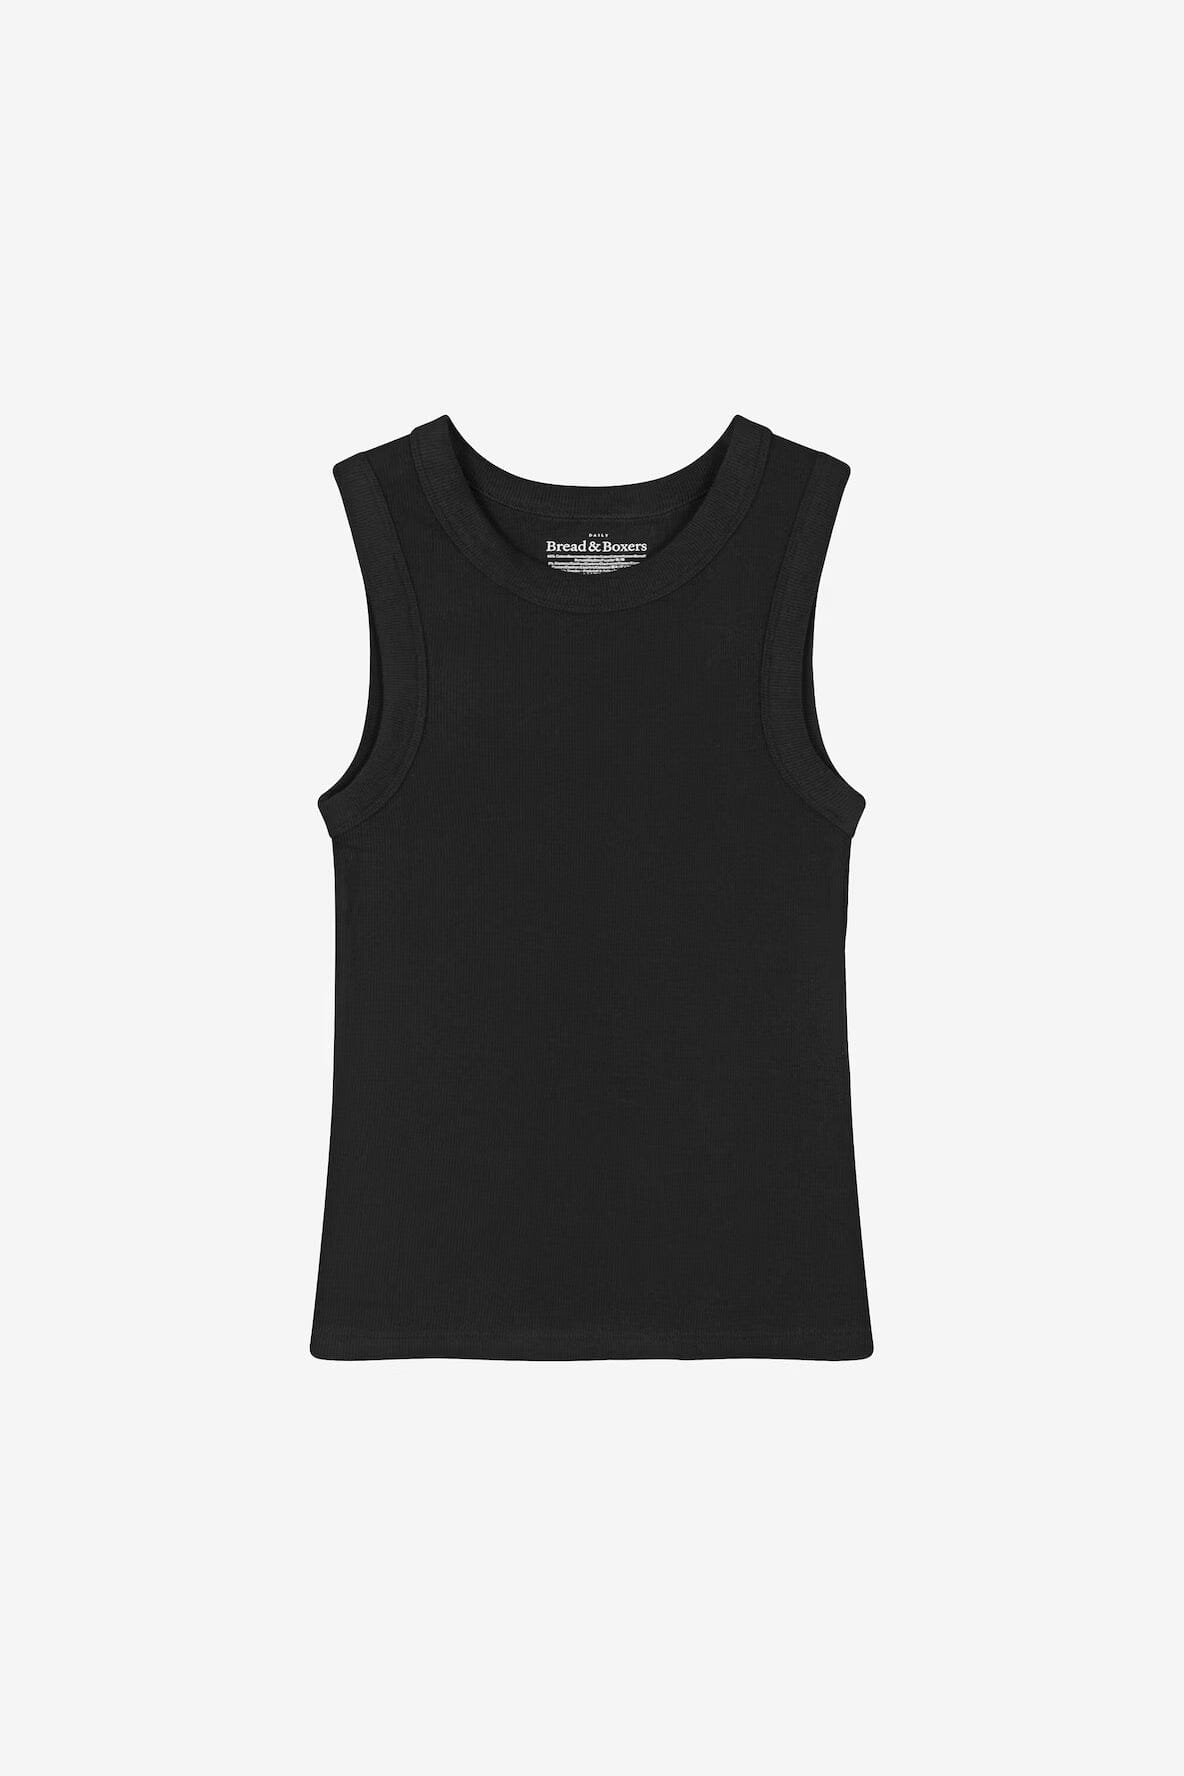 Bread and Boxers Tank Crew-Neck Black T-shirt